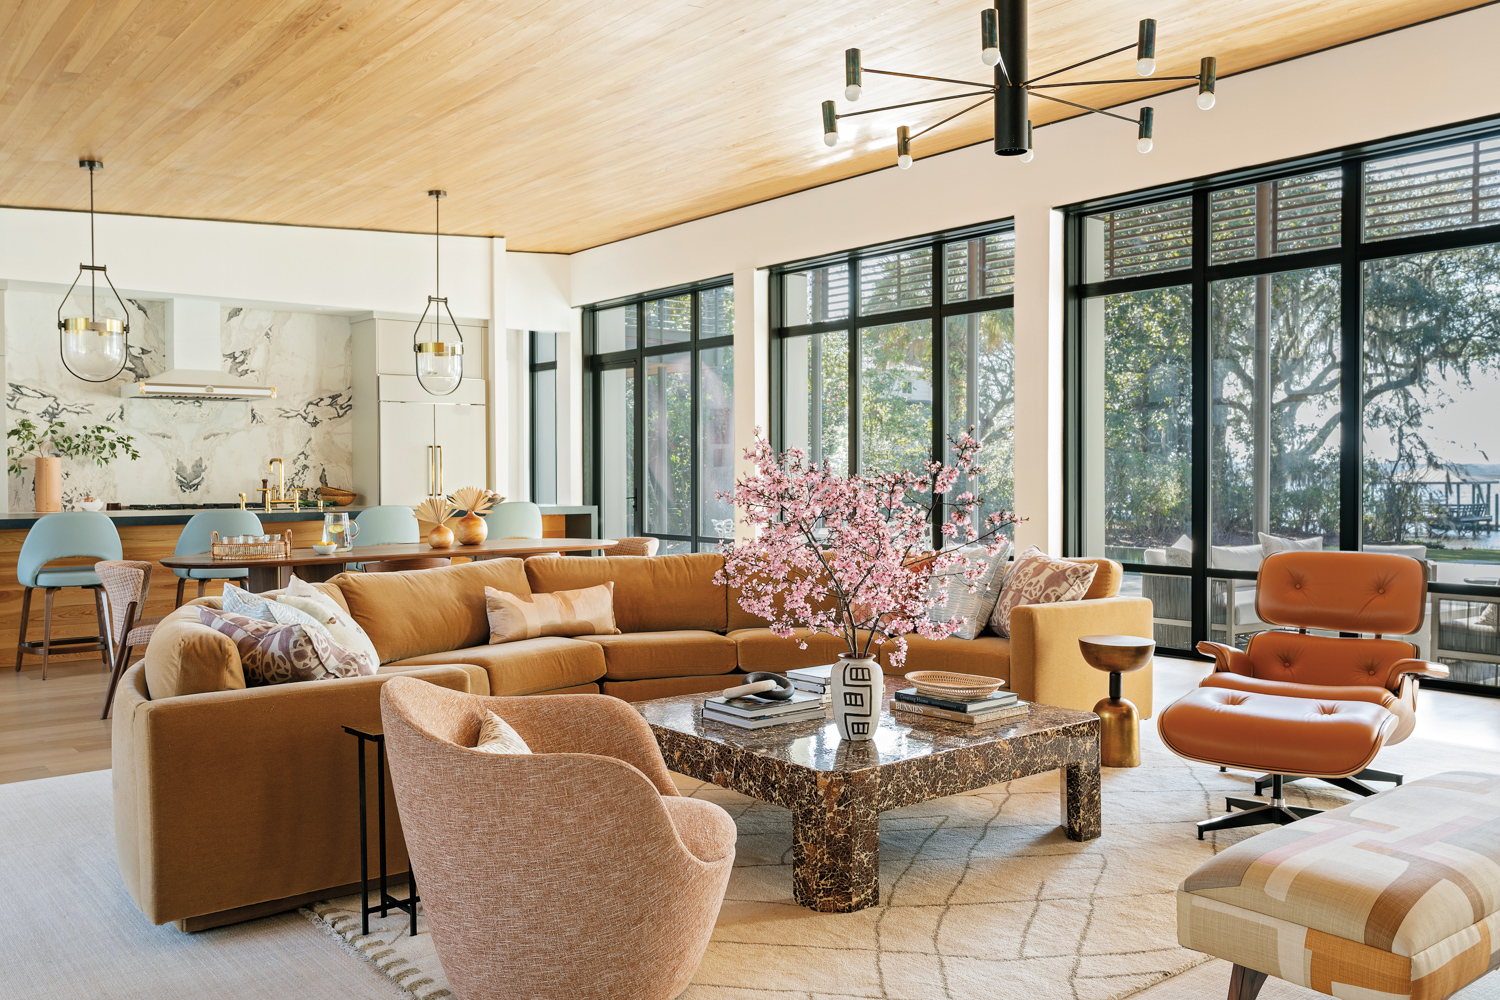 An open-format living room with warm-toned upholstery, a patterned rug, modern chandelier and vintage coffee table